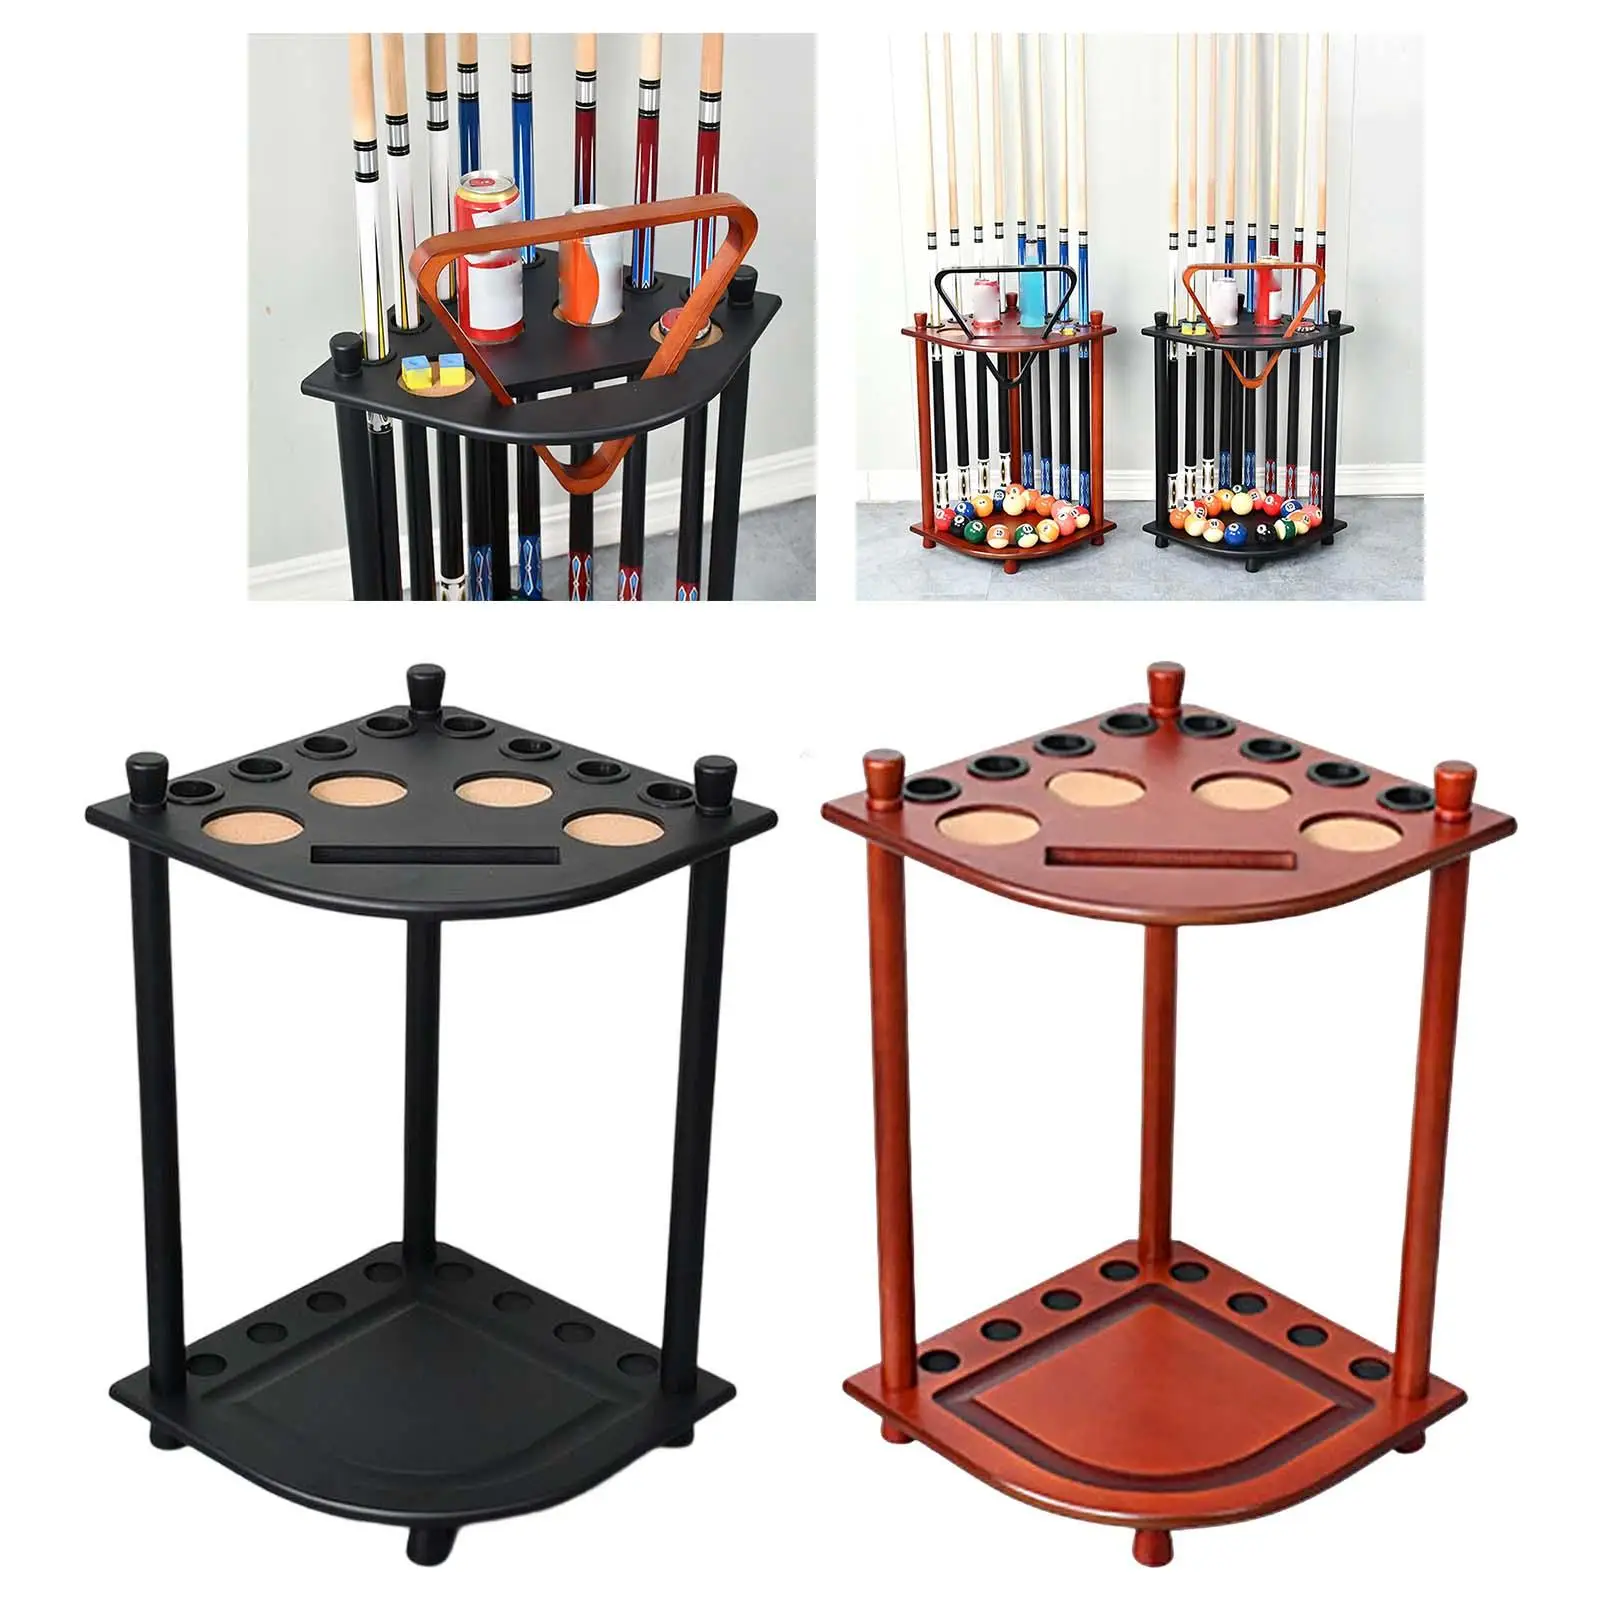 Billiards Pool Rack fors and Balls - Holds 8 Sticks, Free Standing